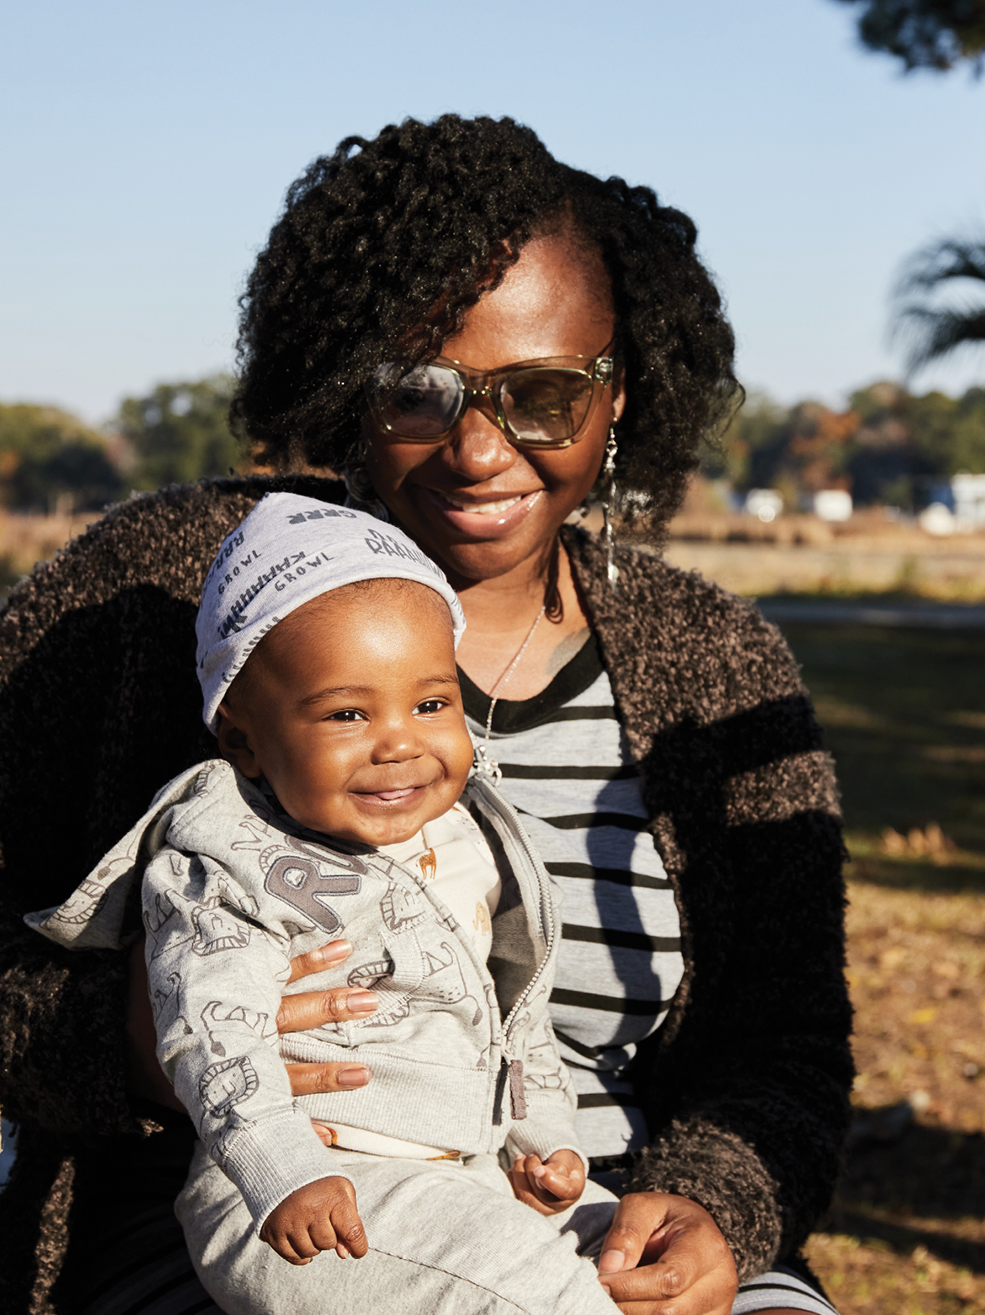 Dennis’s wife, Shenay, and nine-month-old son, Mekhi, at Joseph Fields Farm.